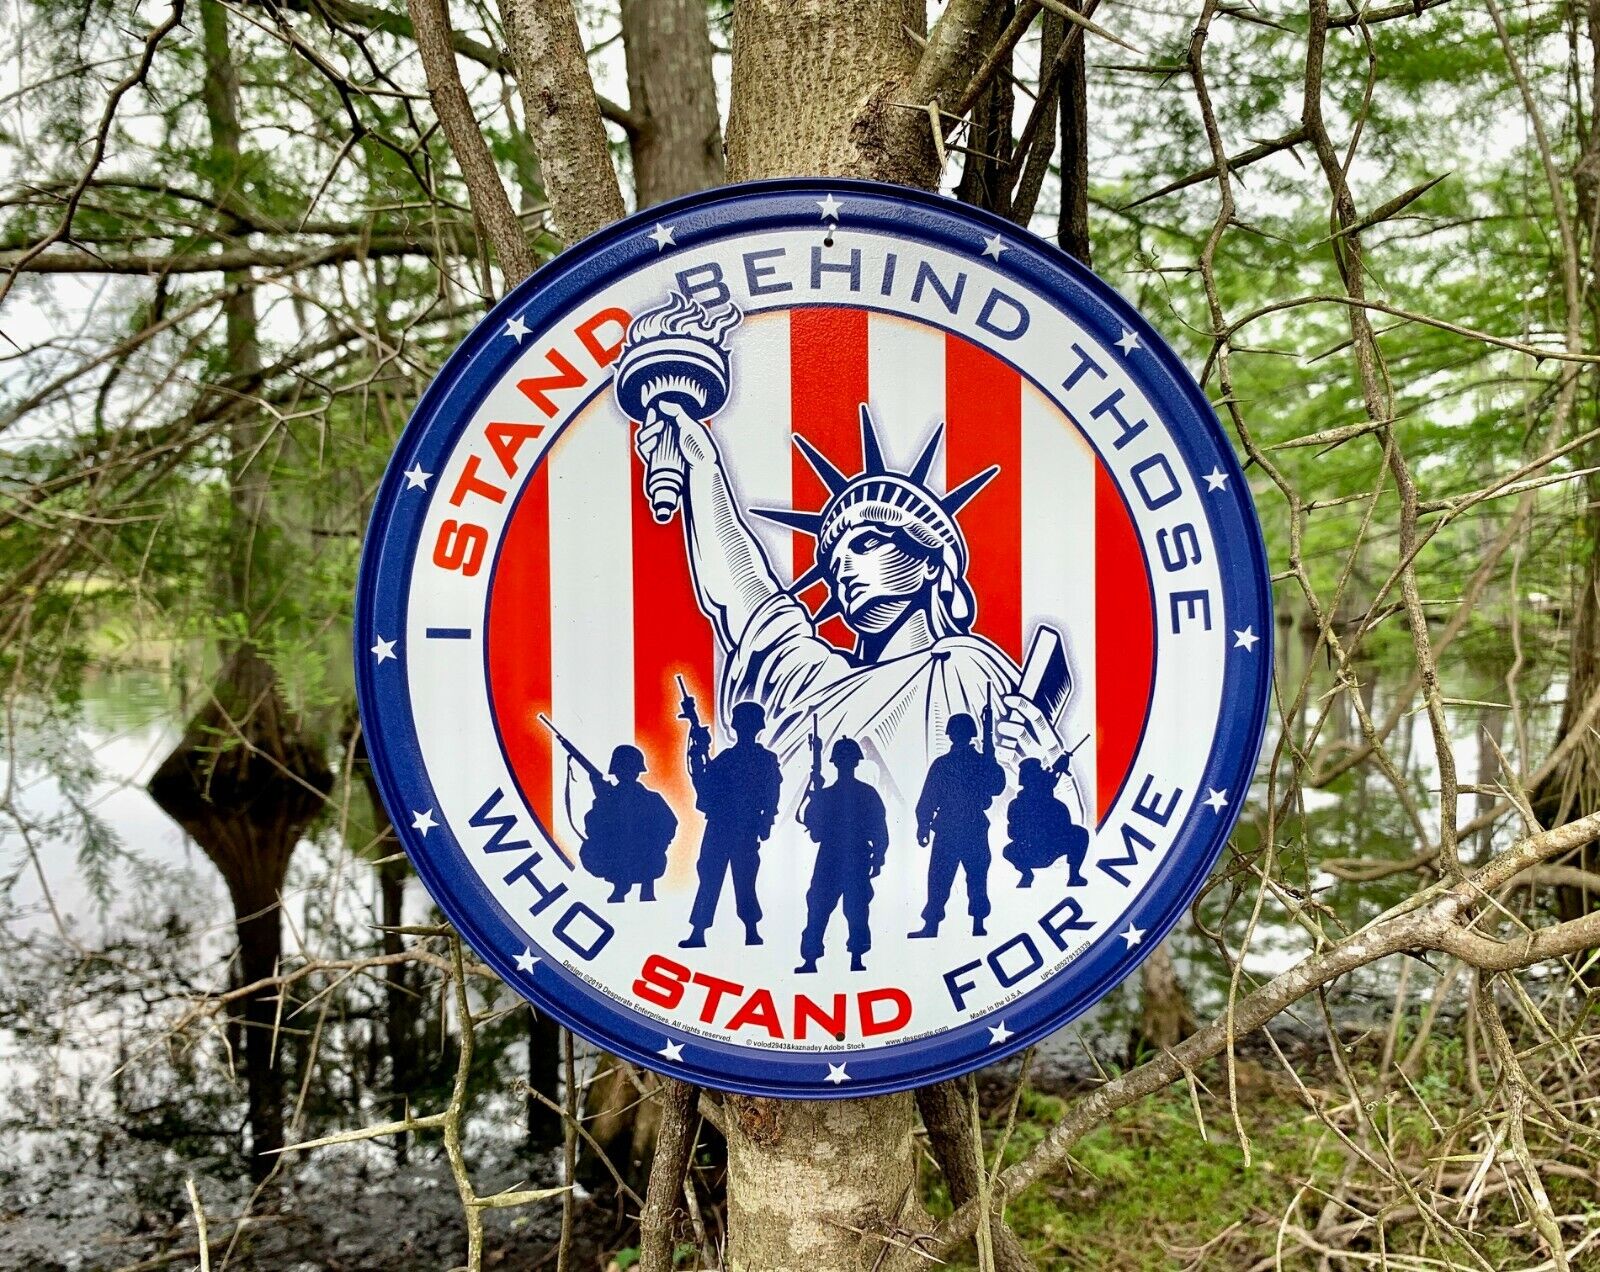 I Stand For Metal Tin Sign Wall Decor Vintage Garage Support Our Troops Shop Art